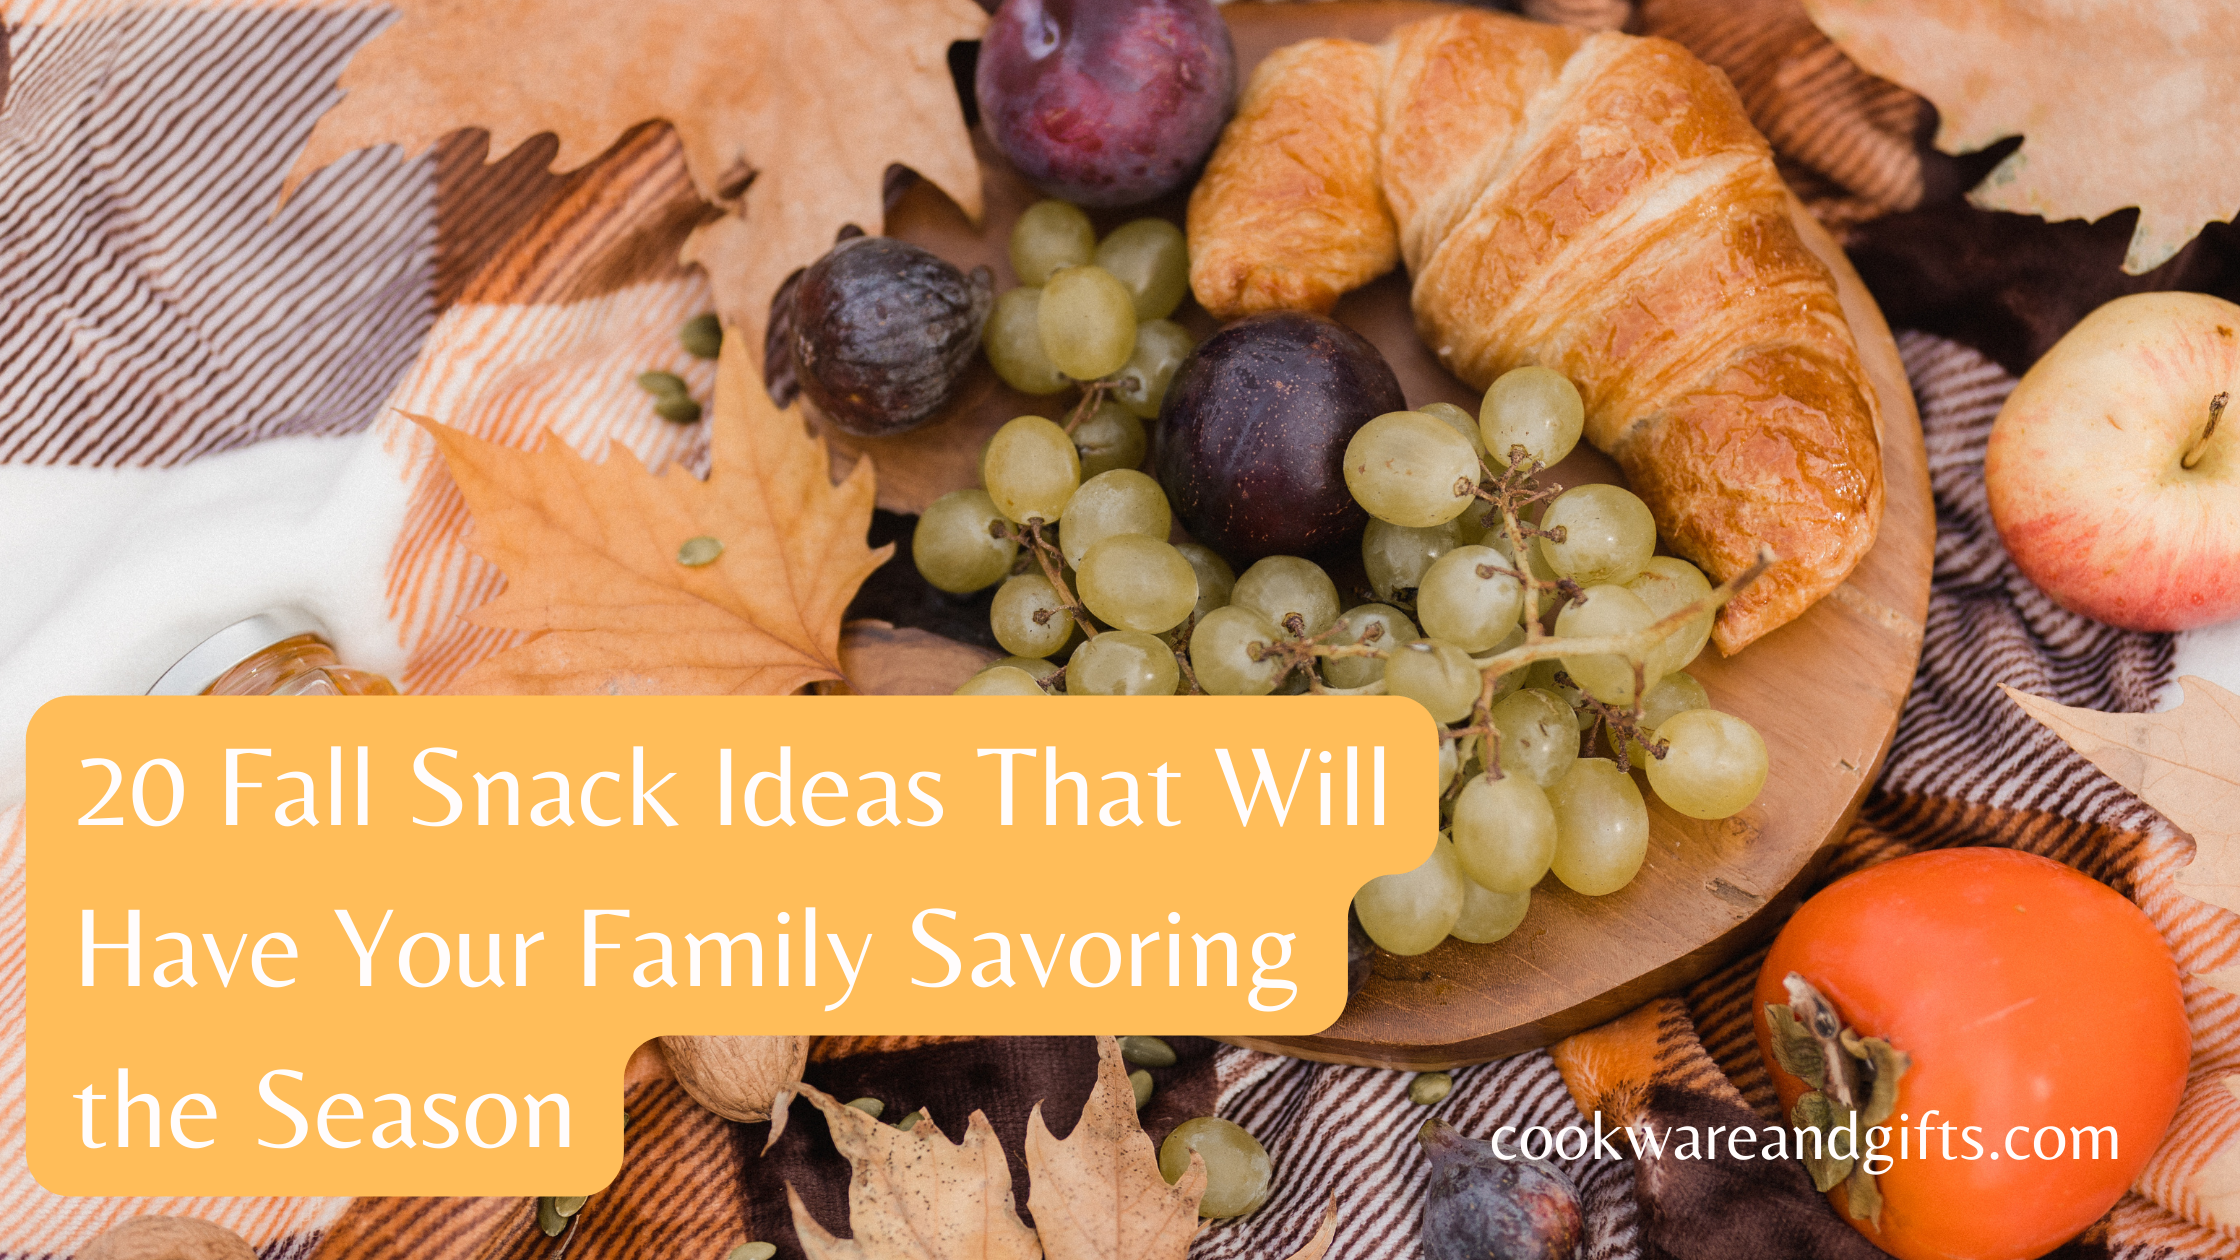 20 Fall Snack Ideas That Will Have Your Entire Family Savoring the Season